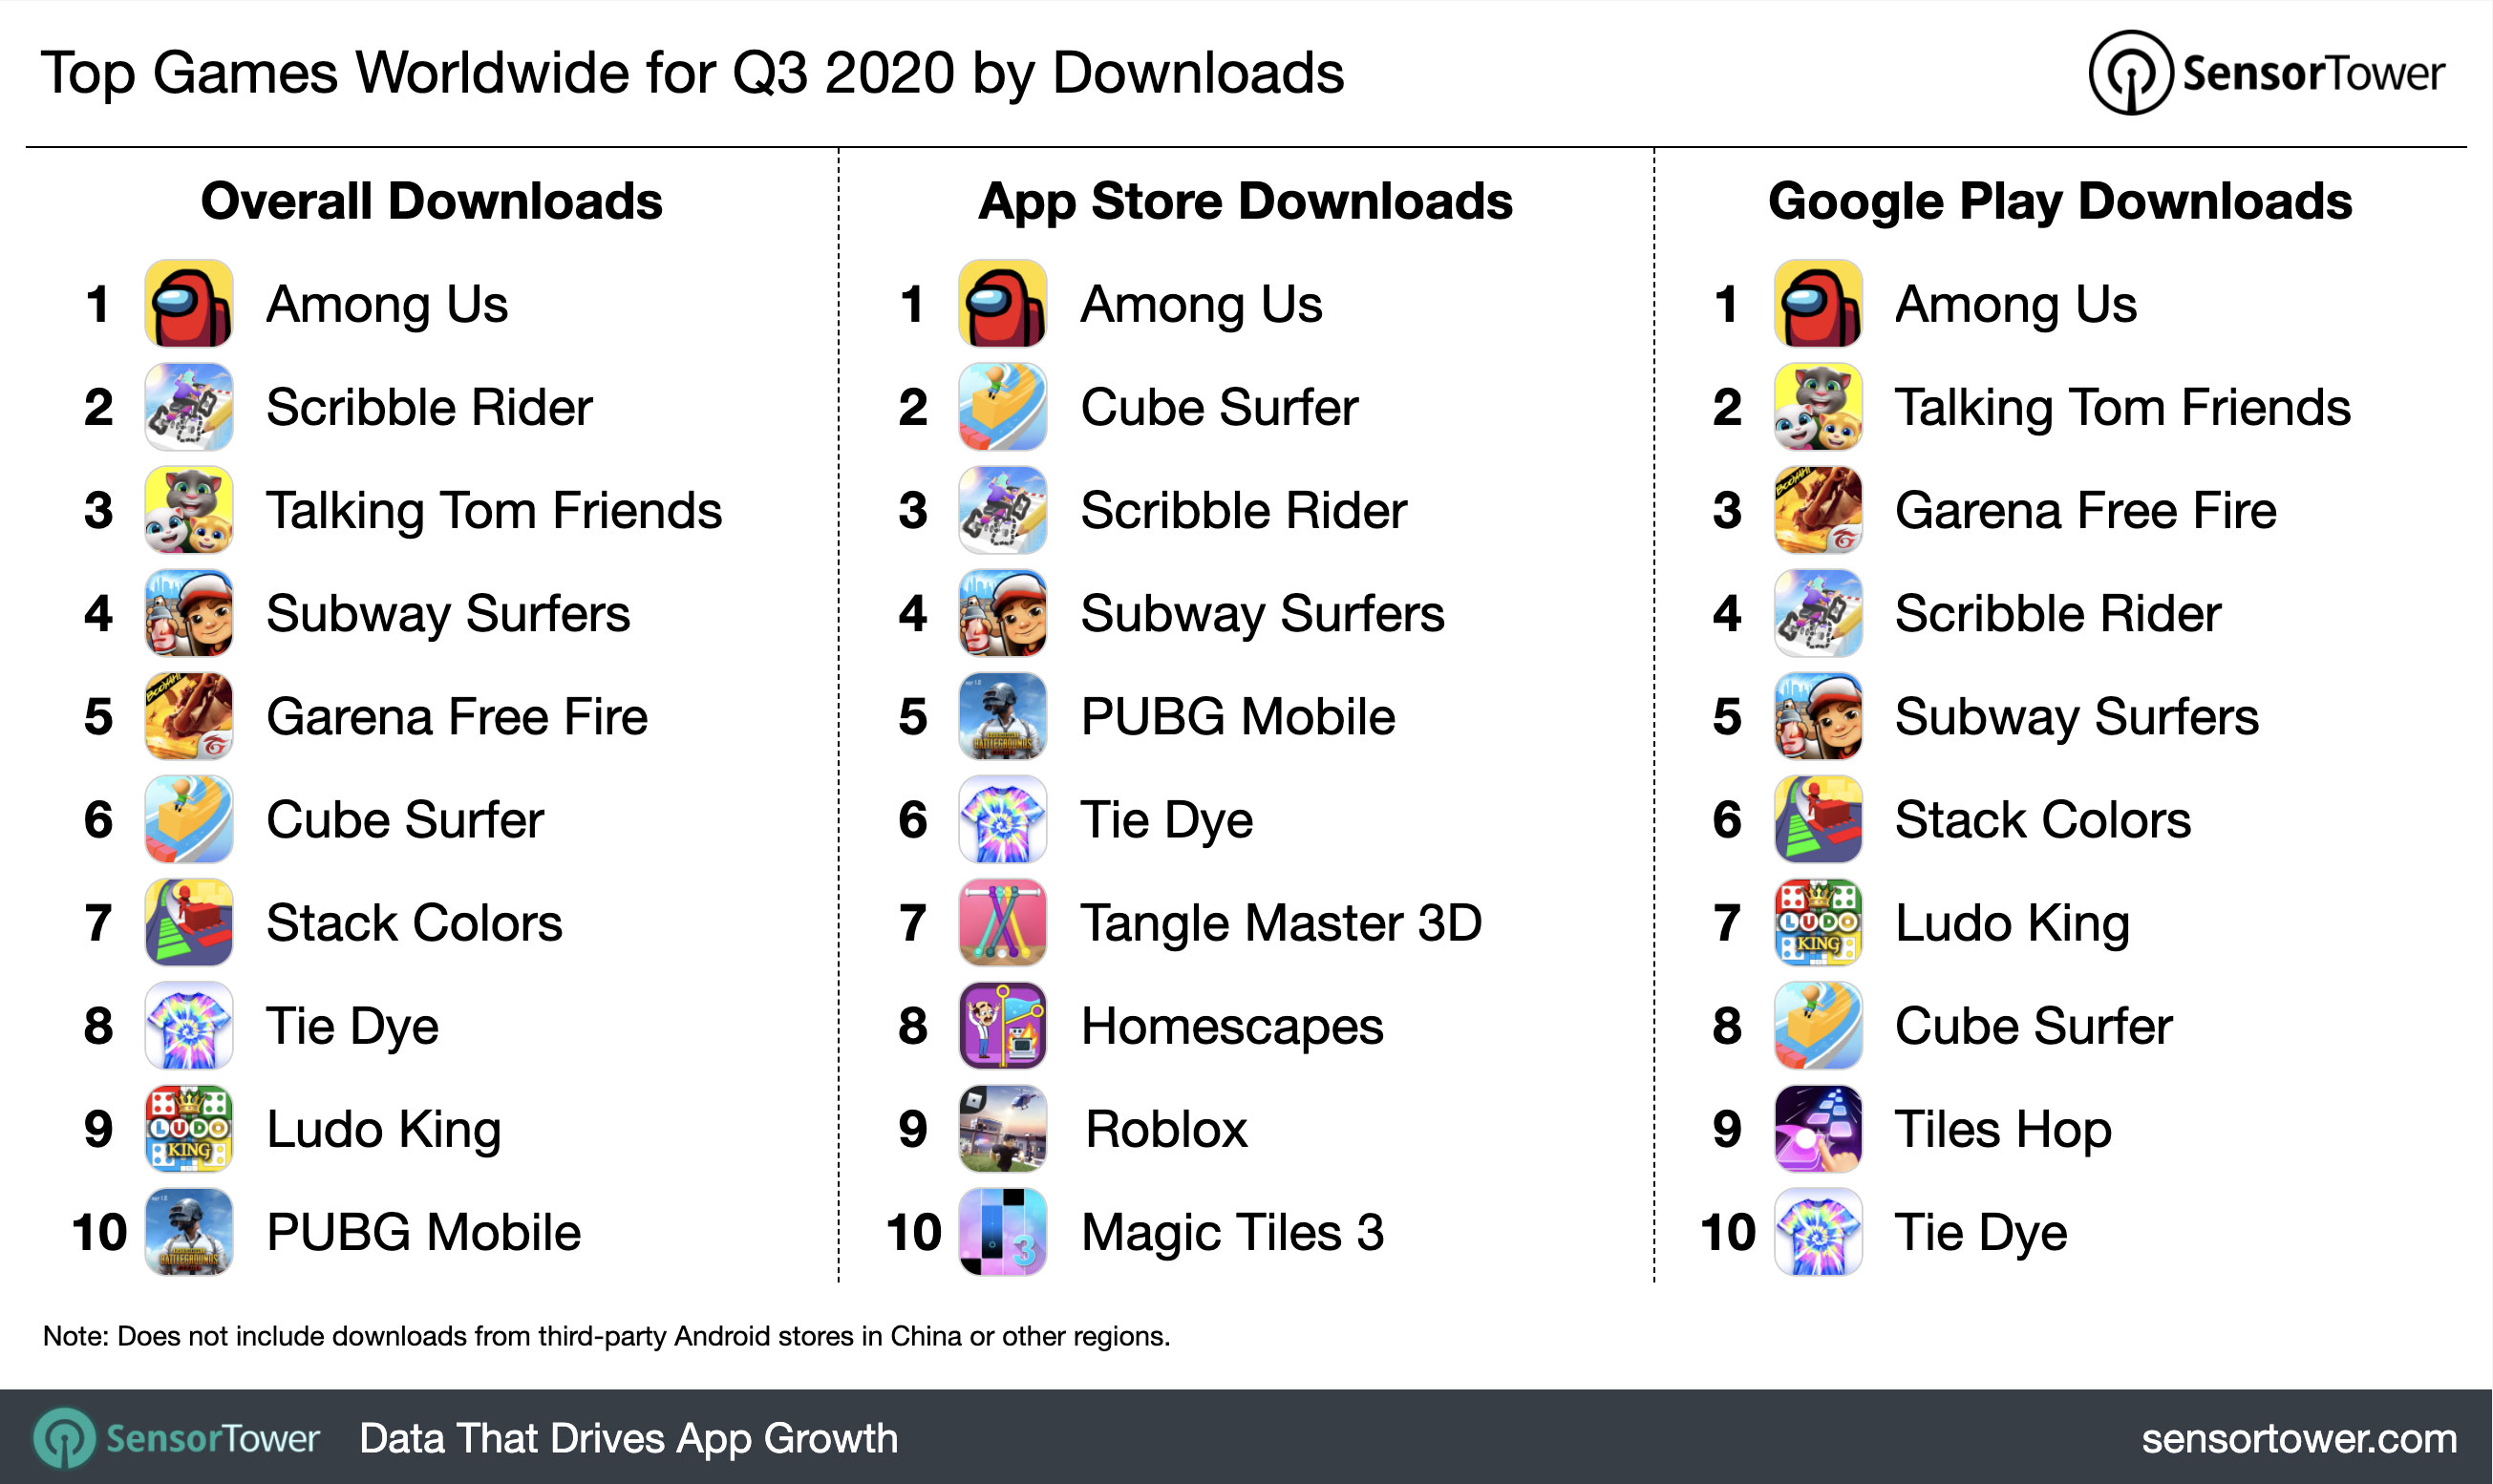 q3-2020-top-game-download-chart